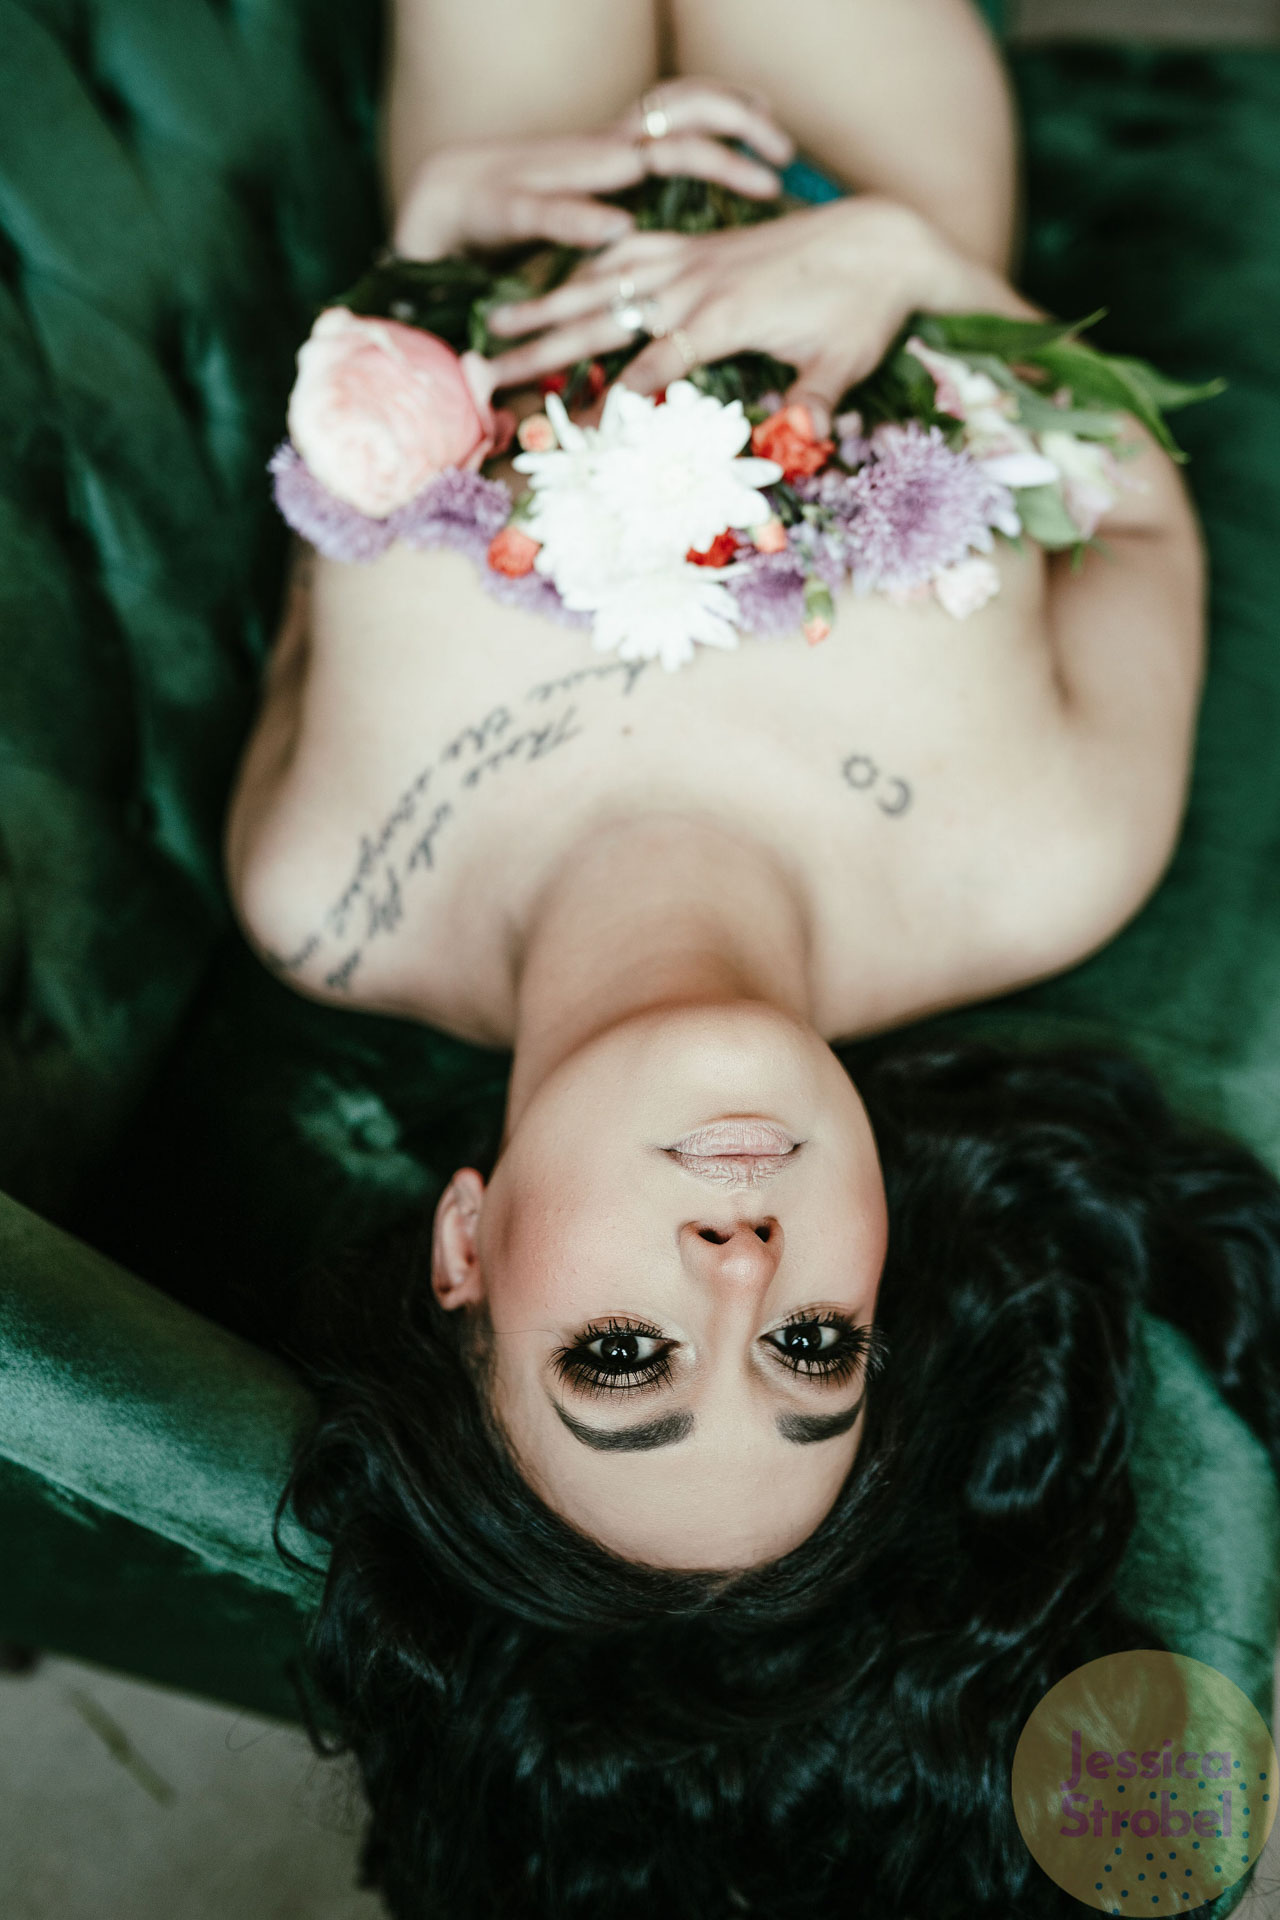 women laying on green velvet couch with fresh flowers covering her breasts